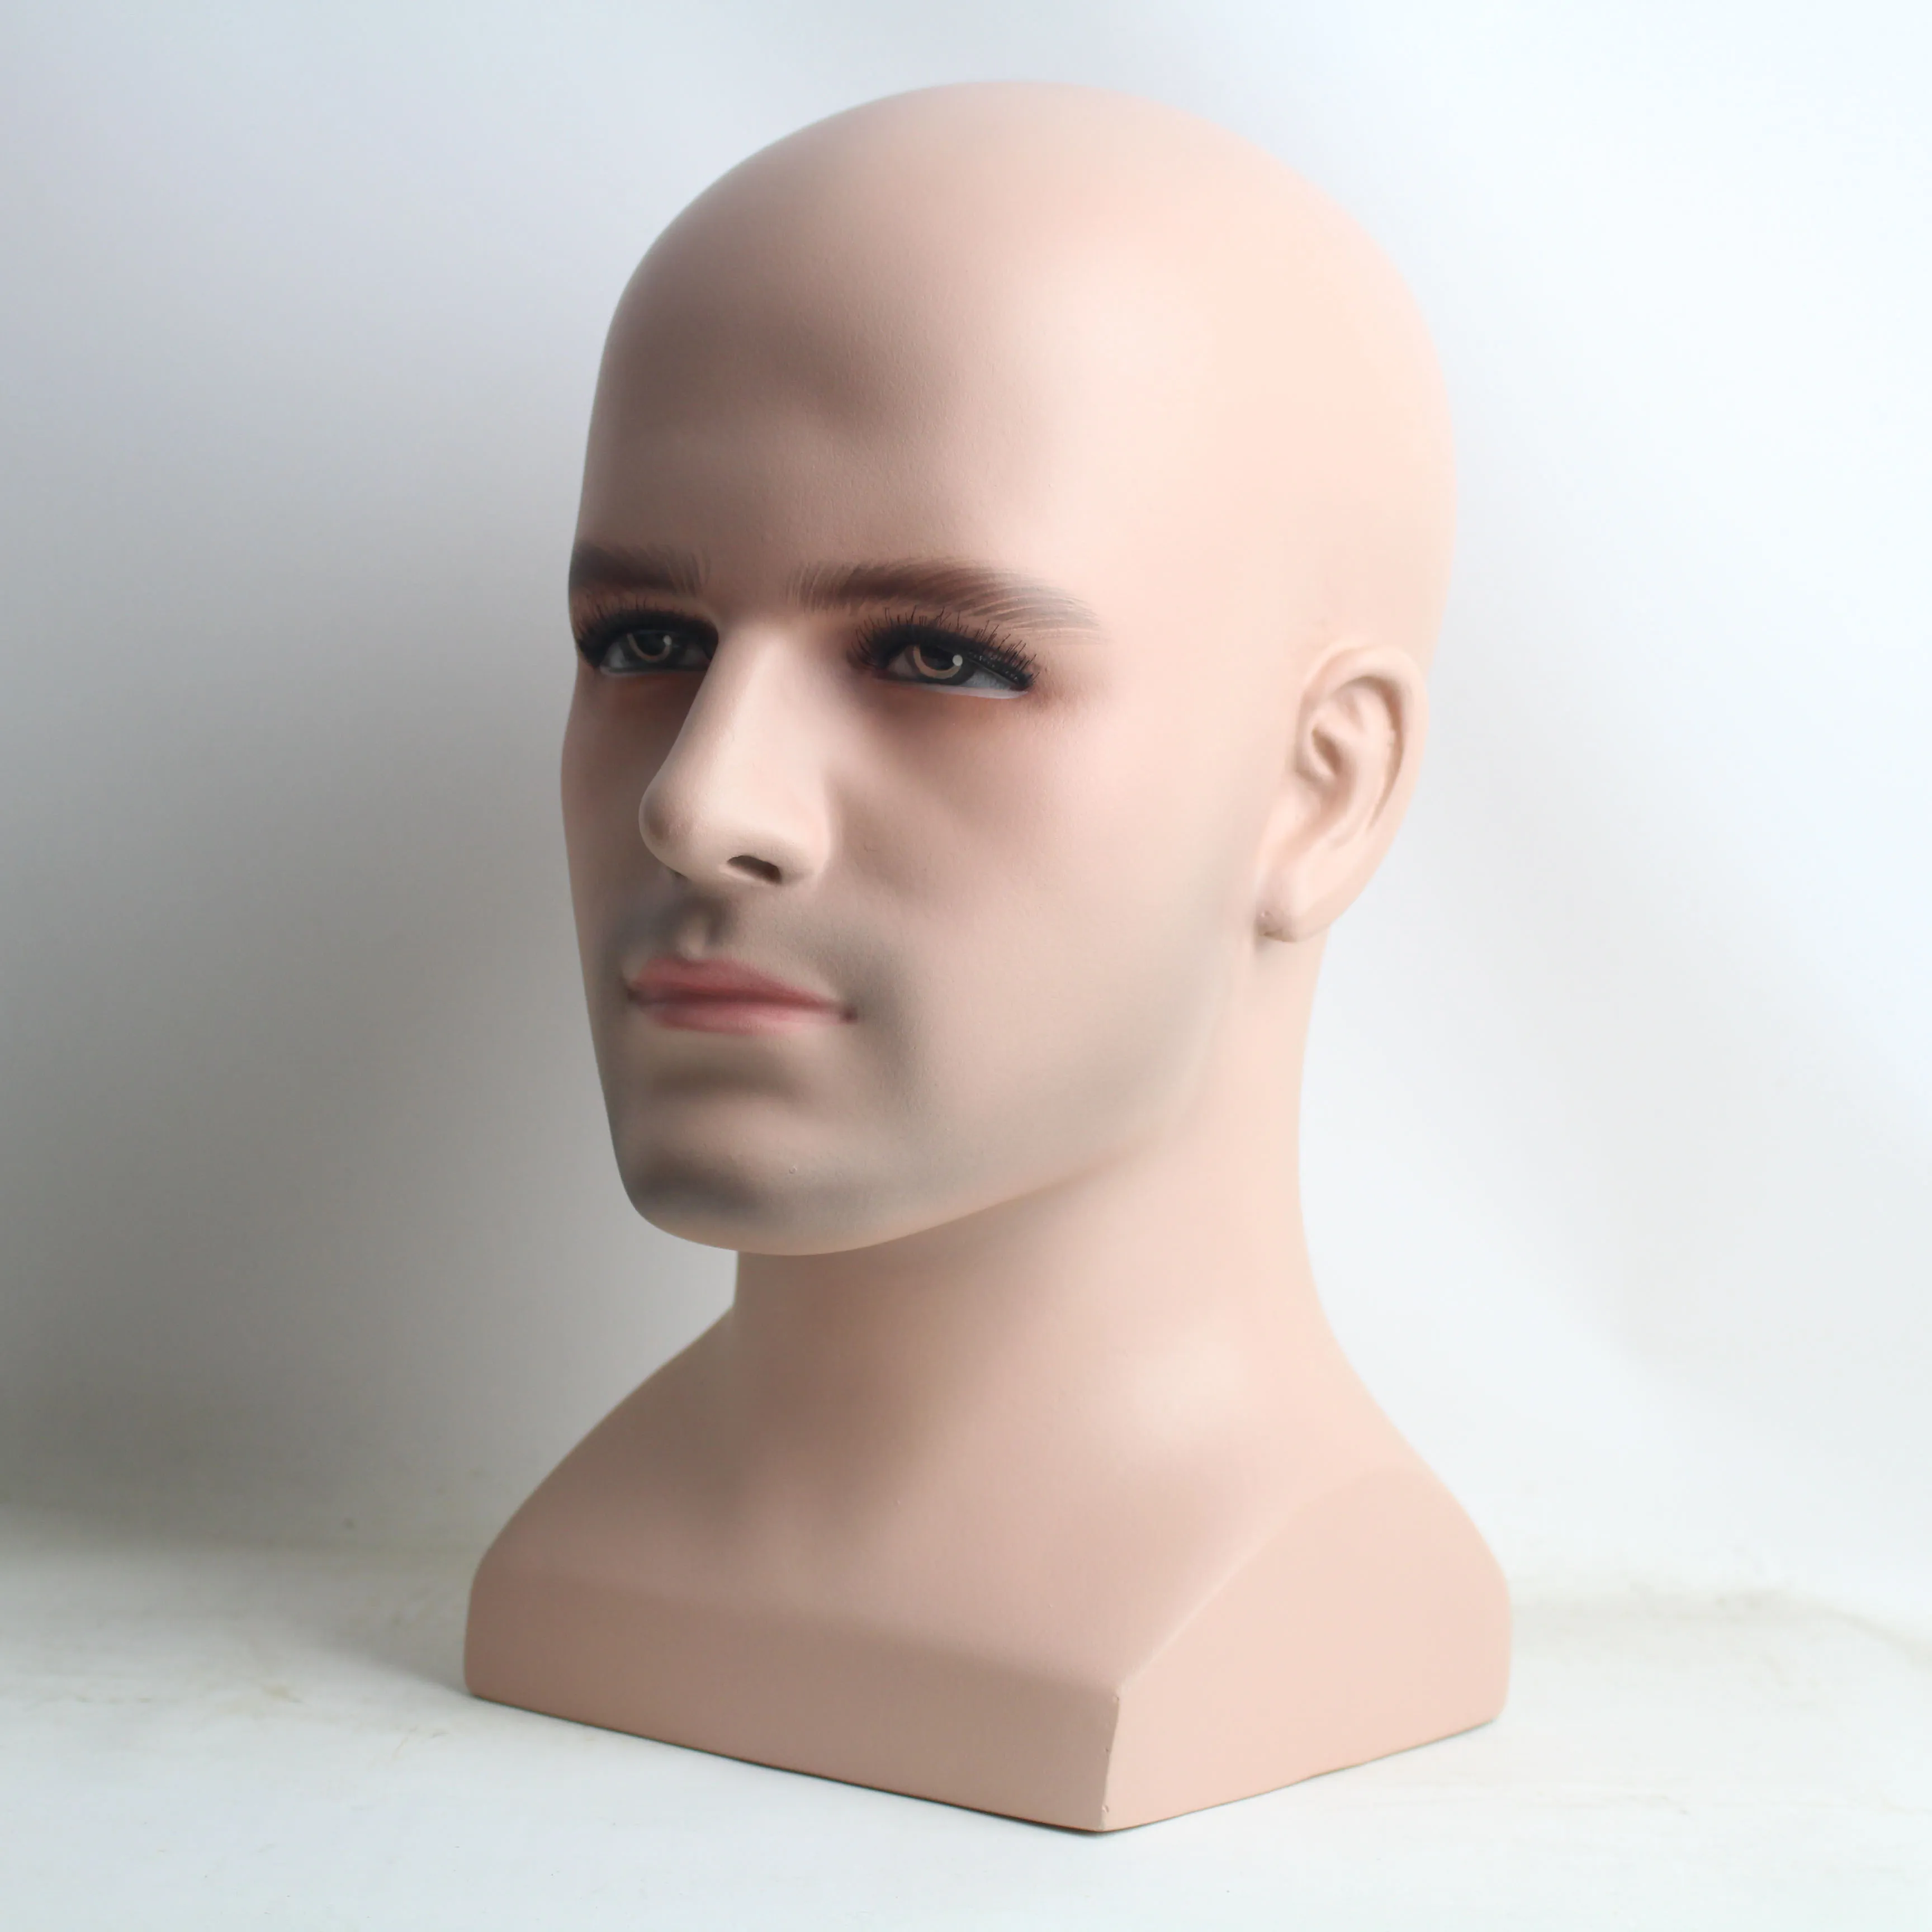 Realistic Fiberglass Male Mannequin Head Aliexpress For Wigs And